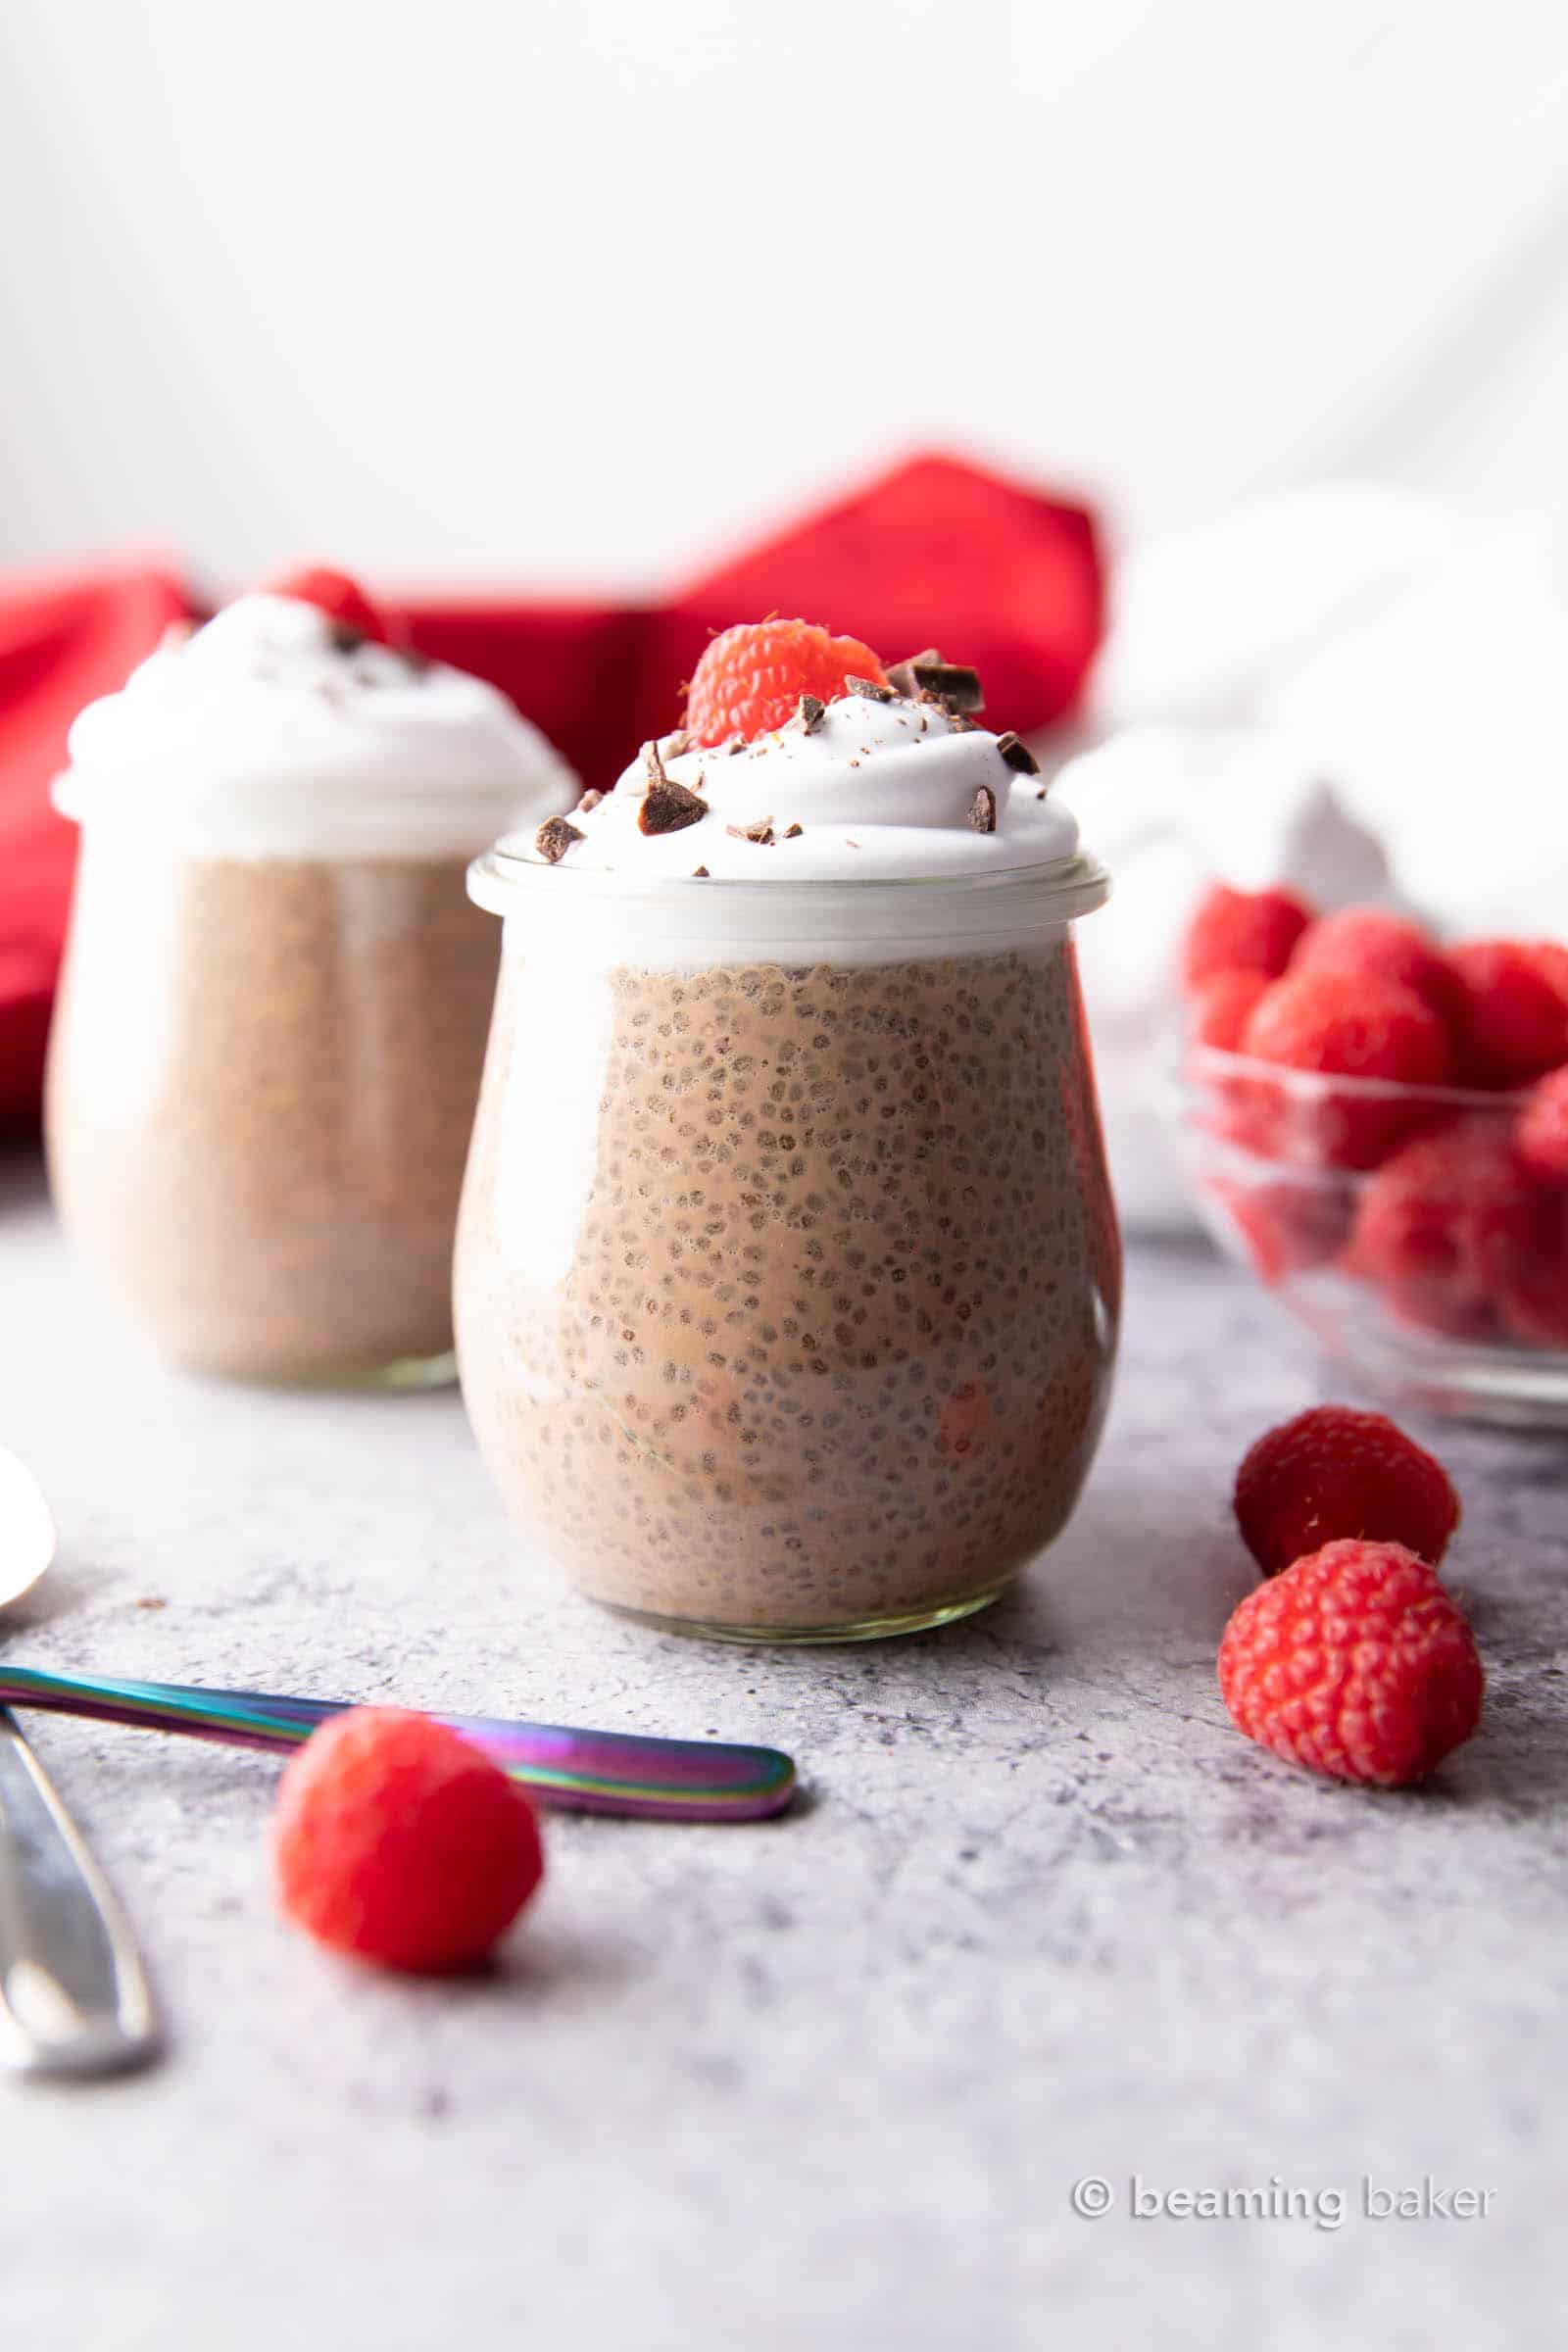 Low Carb Chocolate Chia Pudding (Keto): this rich & chocolatey keto chocolate chia pudding recipe is the best—made with simple ingredients, creamy and thick, and Low Carb! Keto chia pudding never tasted so good. #Keto #KetoDessert #LowCarb #ChiaPudding | Recipe at BeamingBaker.com